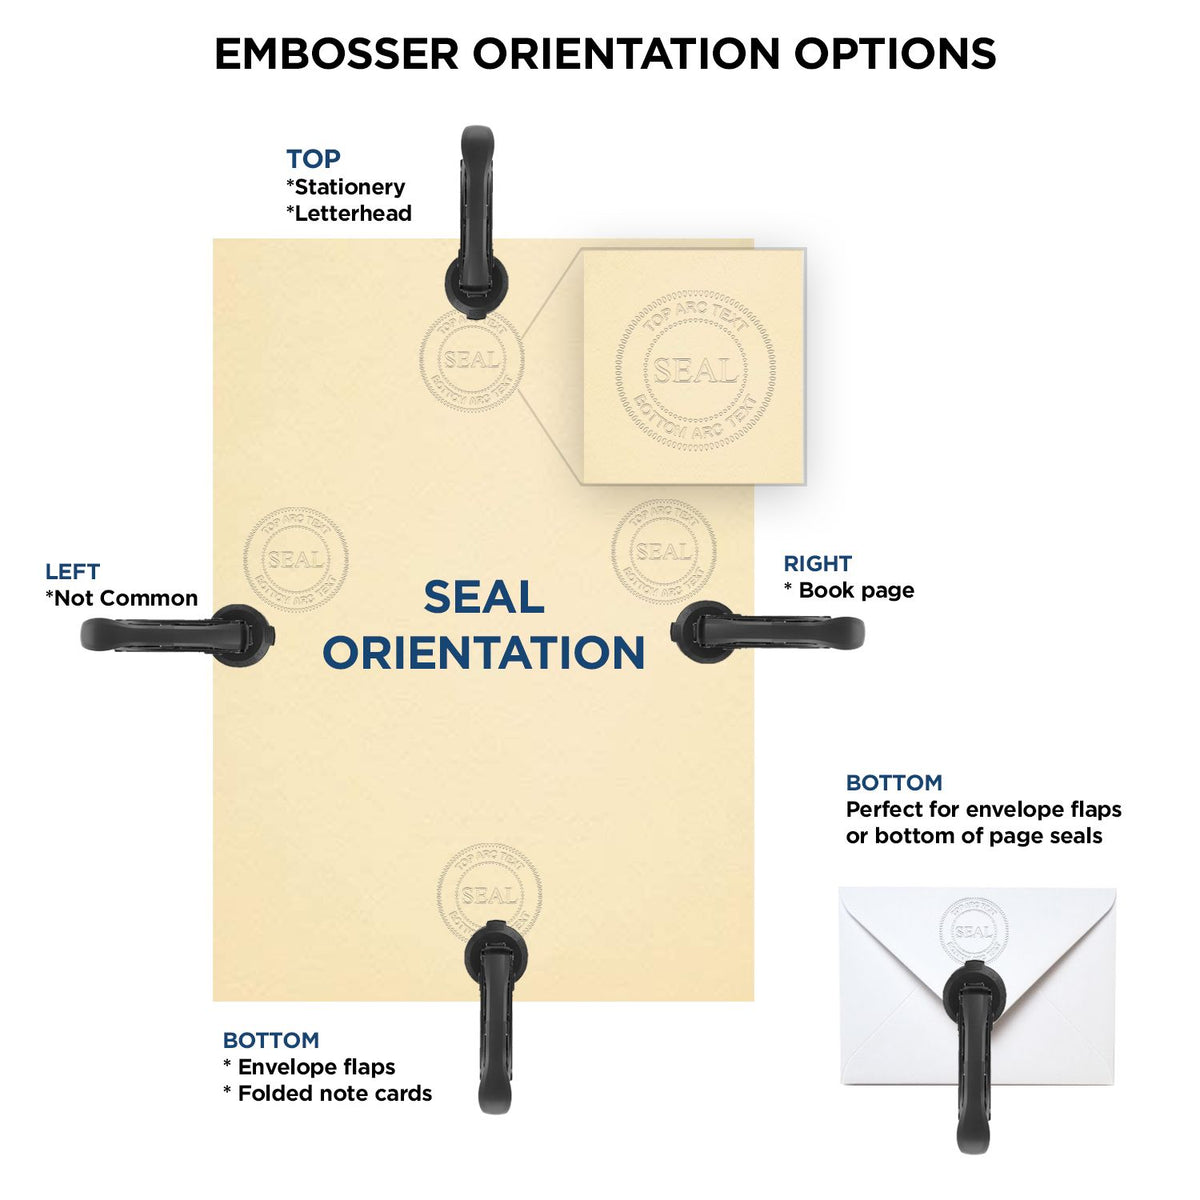 An infographic for the State of Arizona Soft Land Surveyor Embossing Seal showing embosser orientation, this is showing examples of a top, bottom, right and left insert.